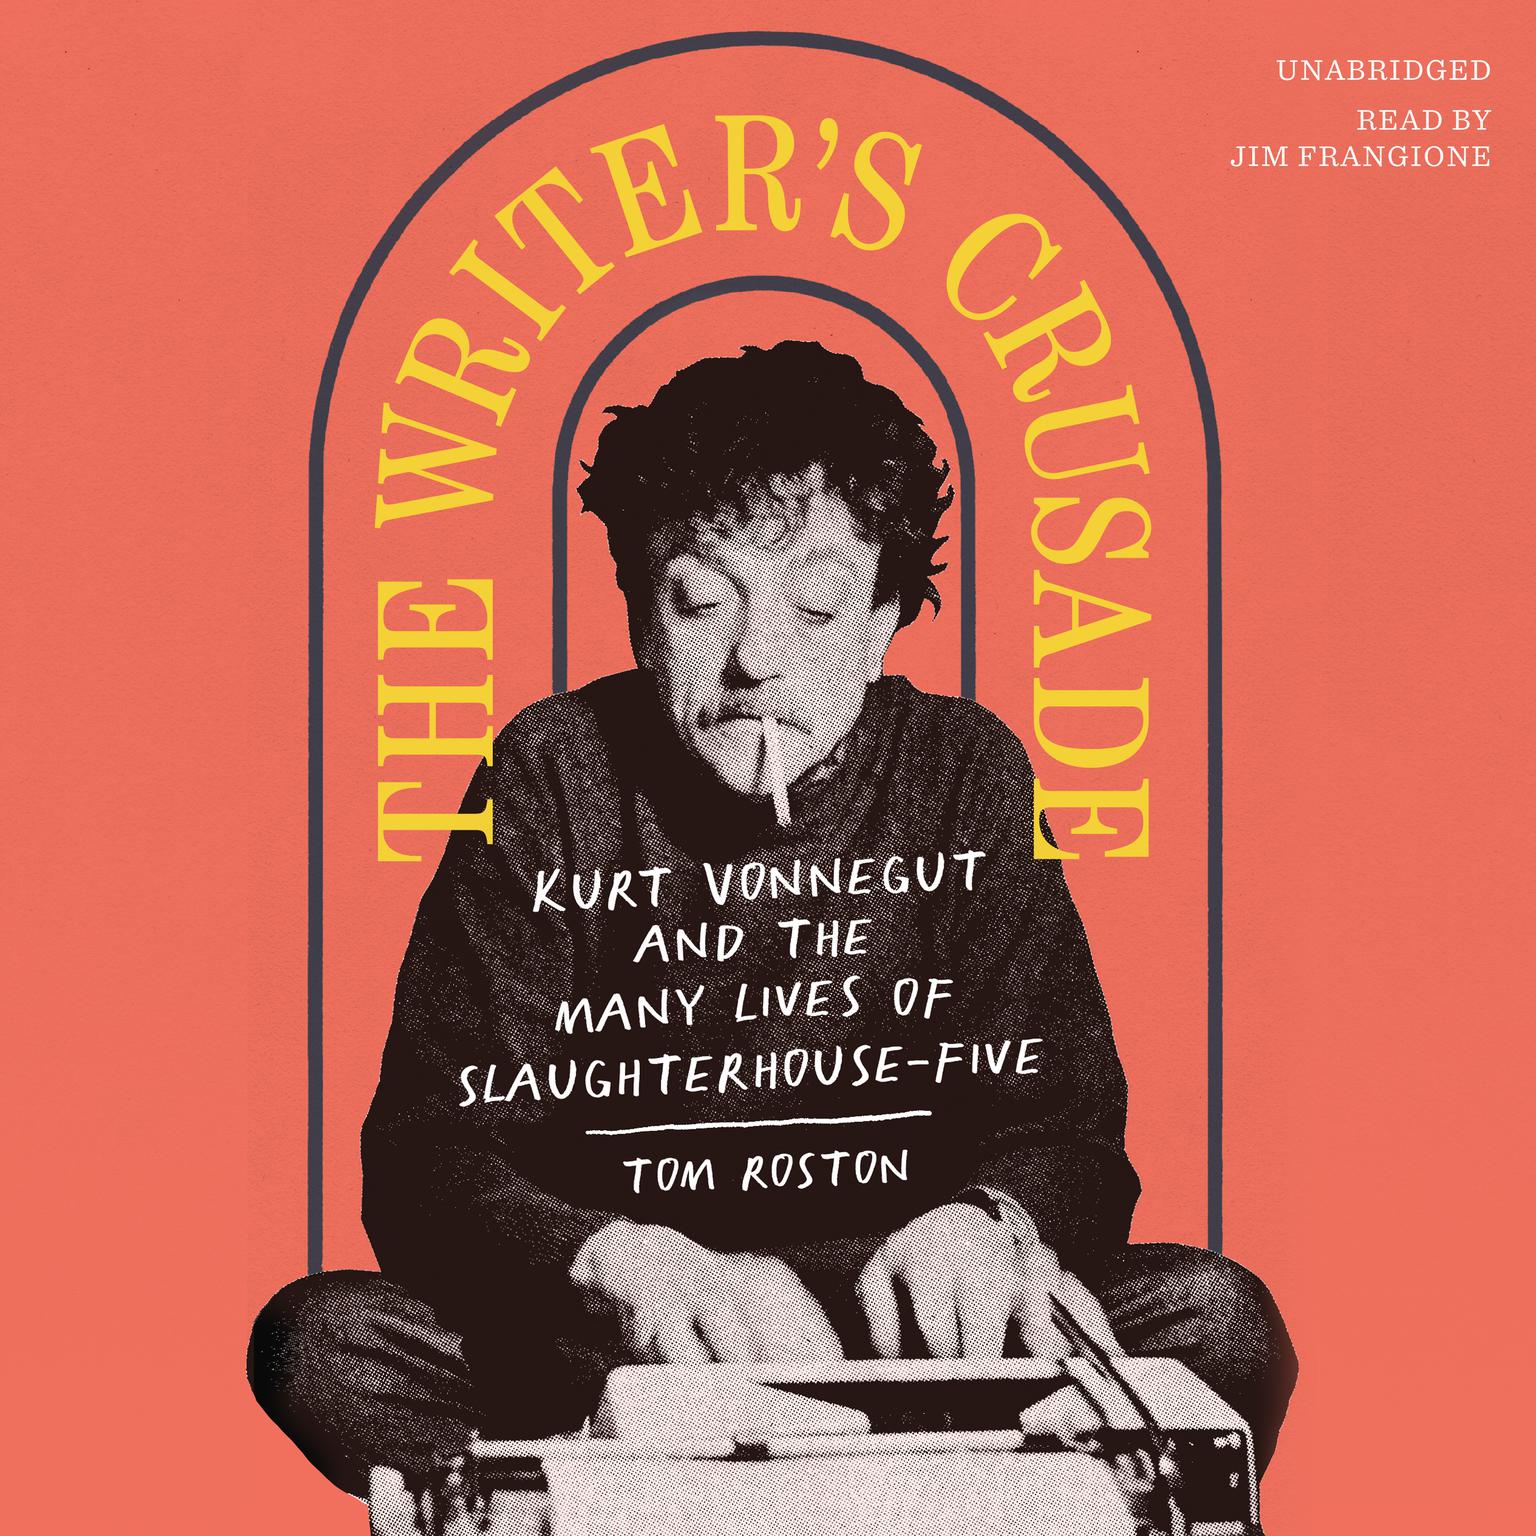 The Writer’s Crusade: Kurt Vonnegut and the Many Lives of Slaughterhouse-Five Audiobook, by Tom Roston